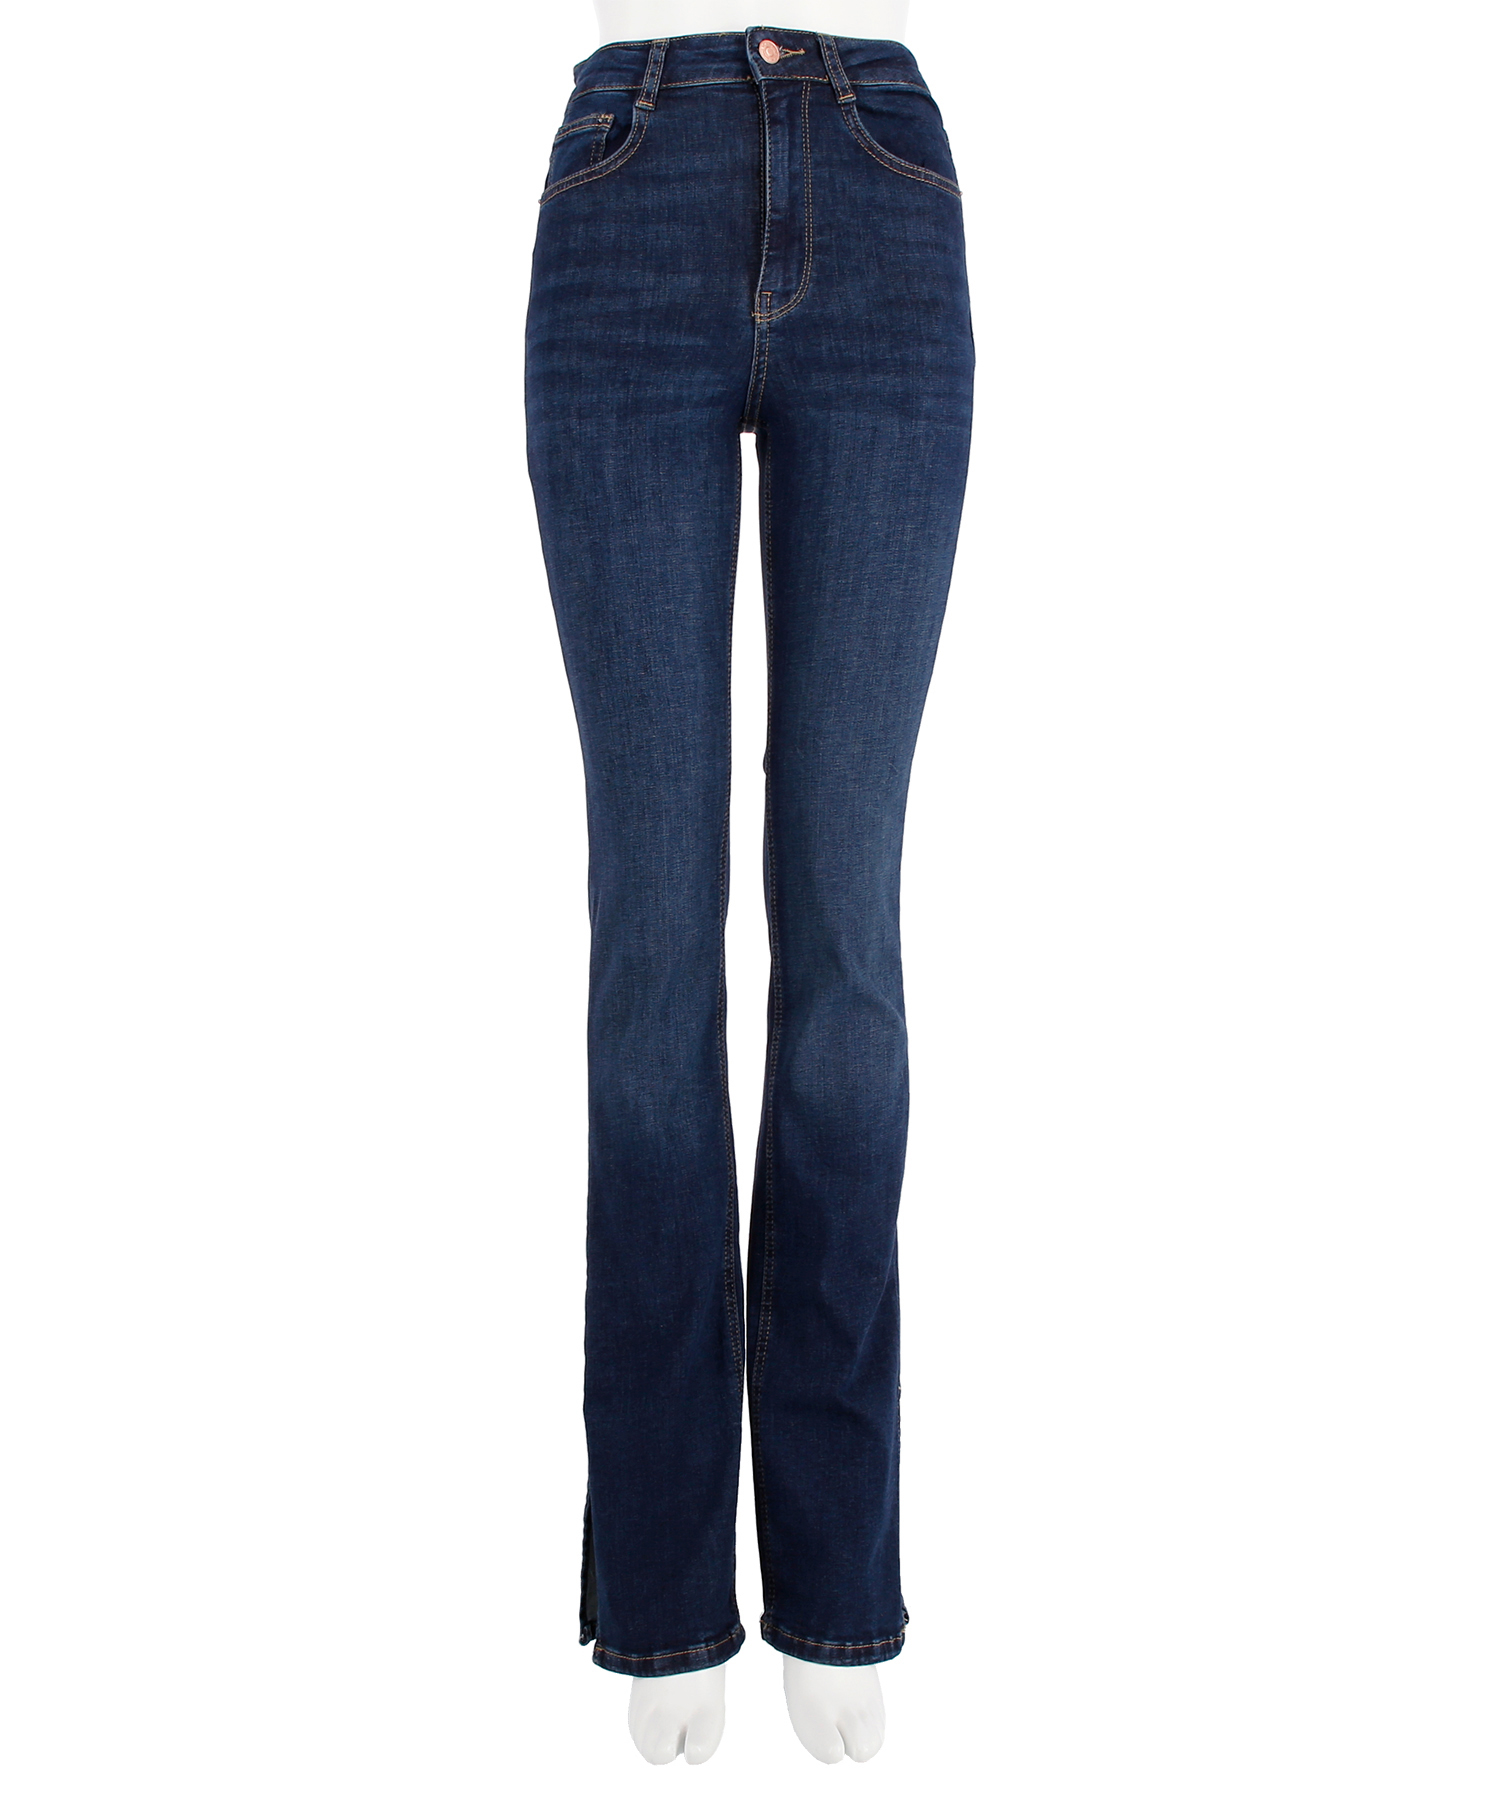 Molly slit jeans Rinse